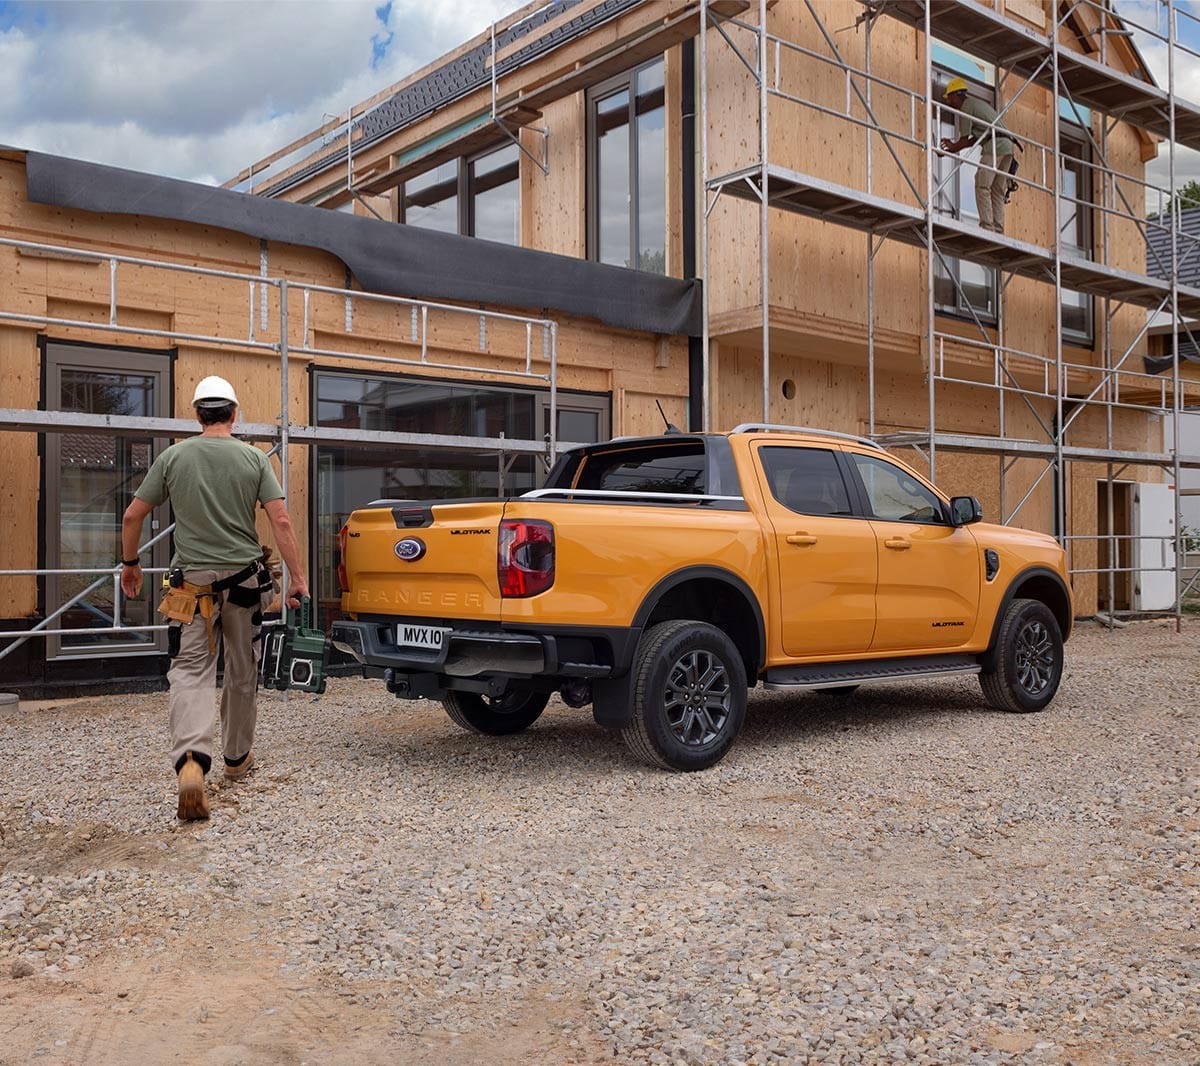 All-New Ford Ranger parked by construction 3/4 rear view